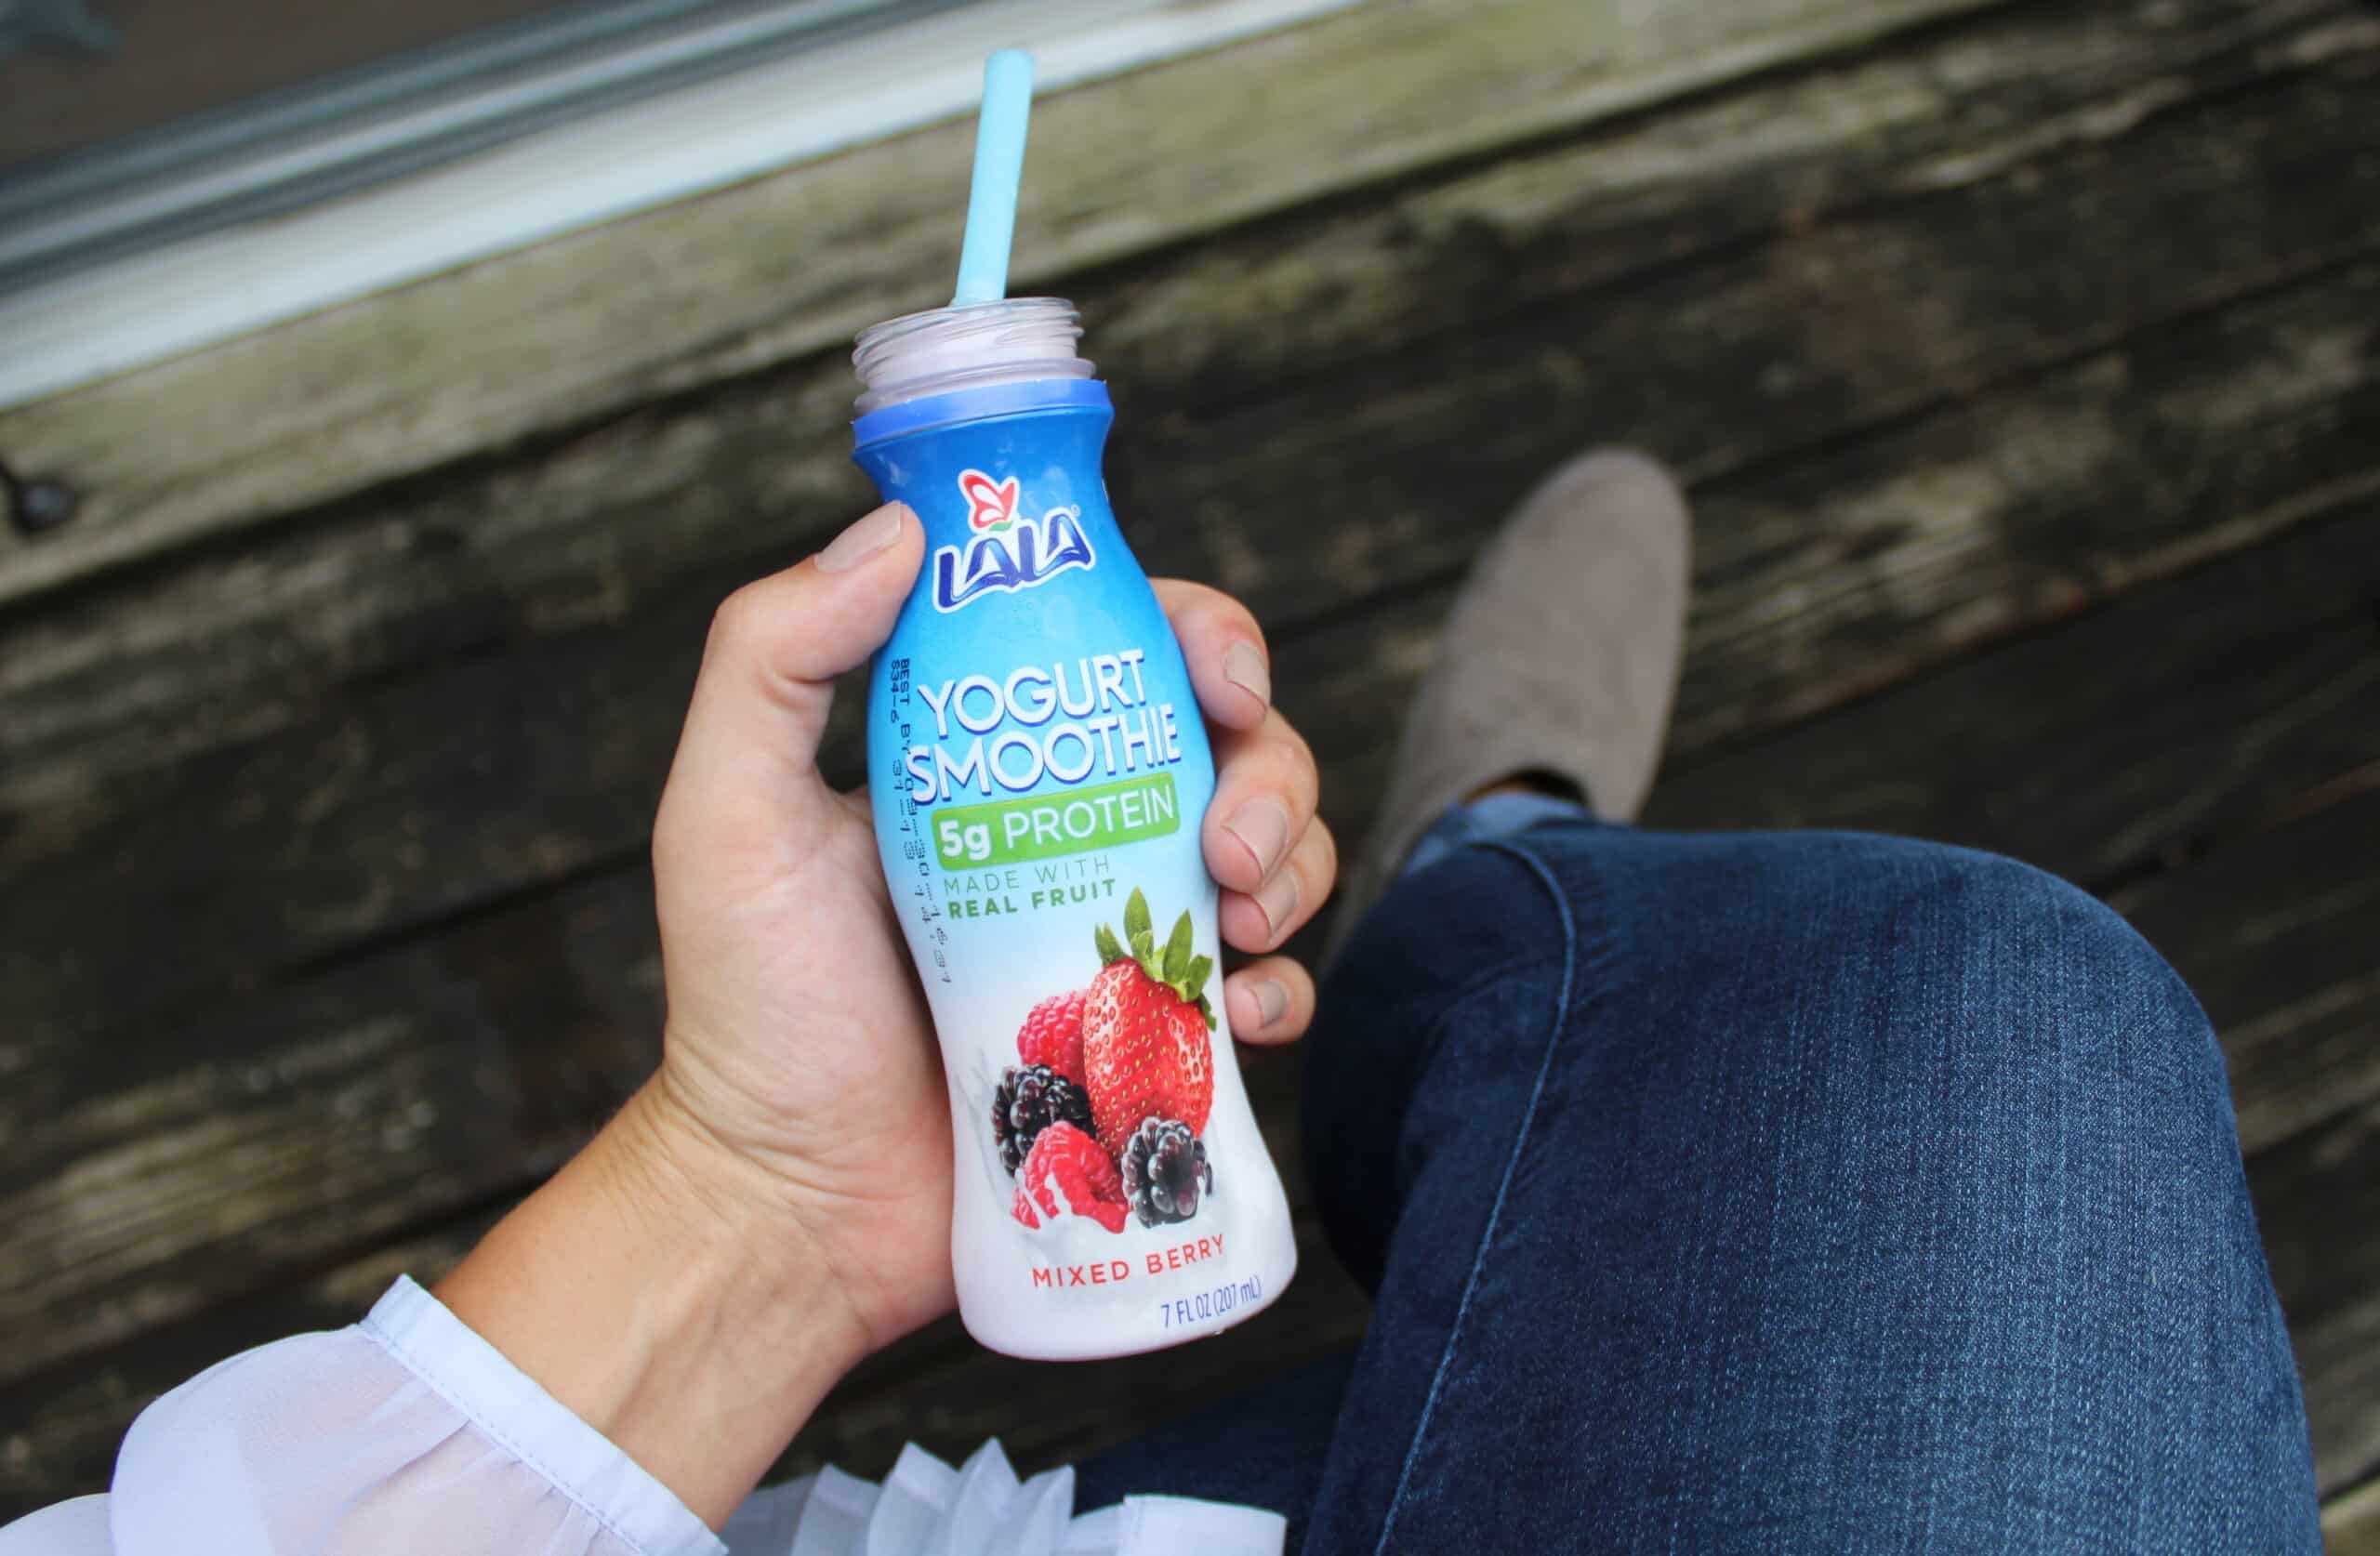 Is Lala Yogurt Smoothie Good For Weight Loss?